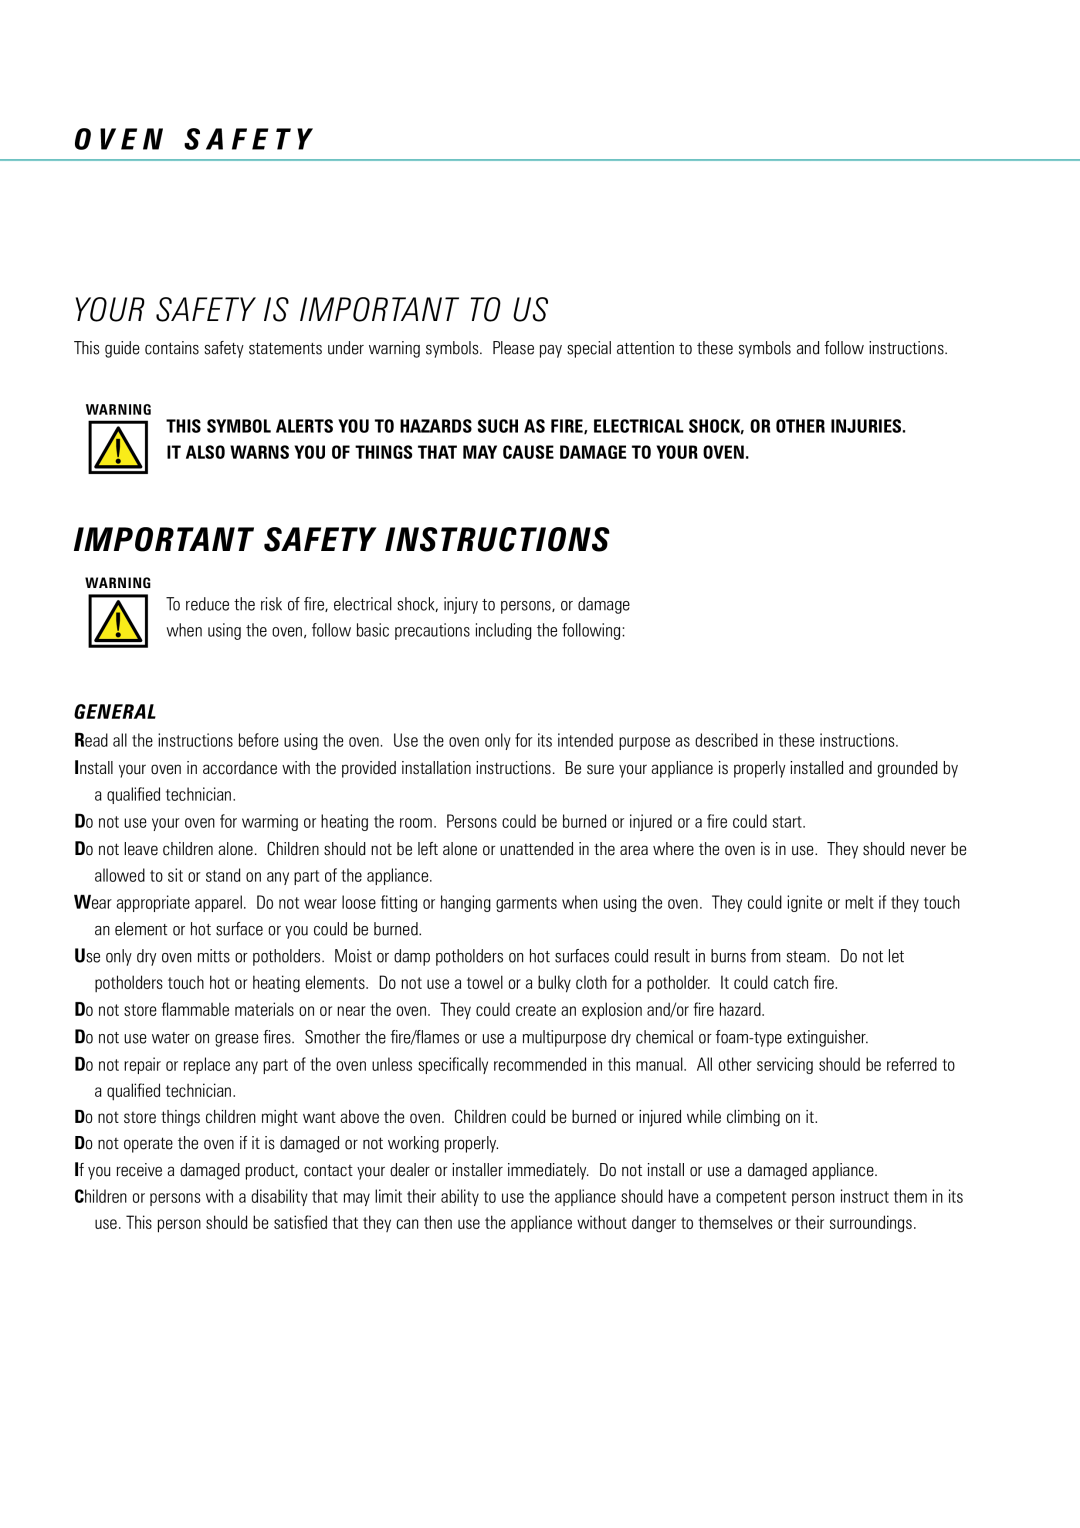 Fisher & Paykel AeroTech manual Important Safety Instructions, O V E N S A F E T Y, General, Your Safety Is Important To Us 